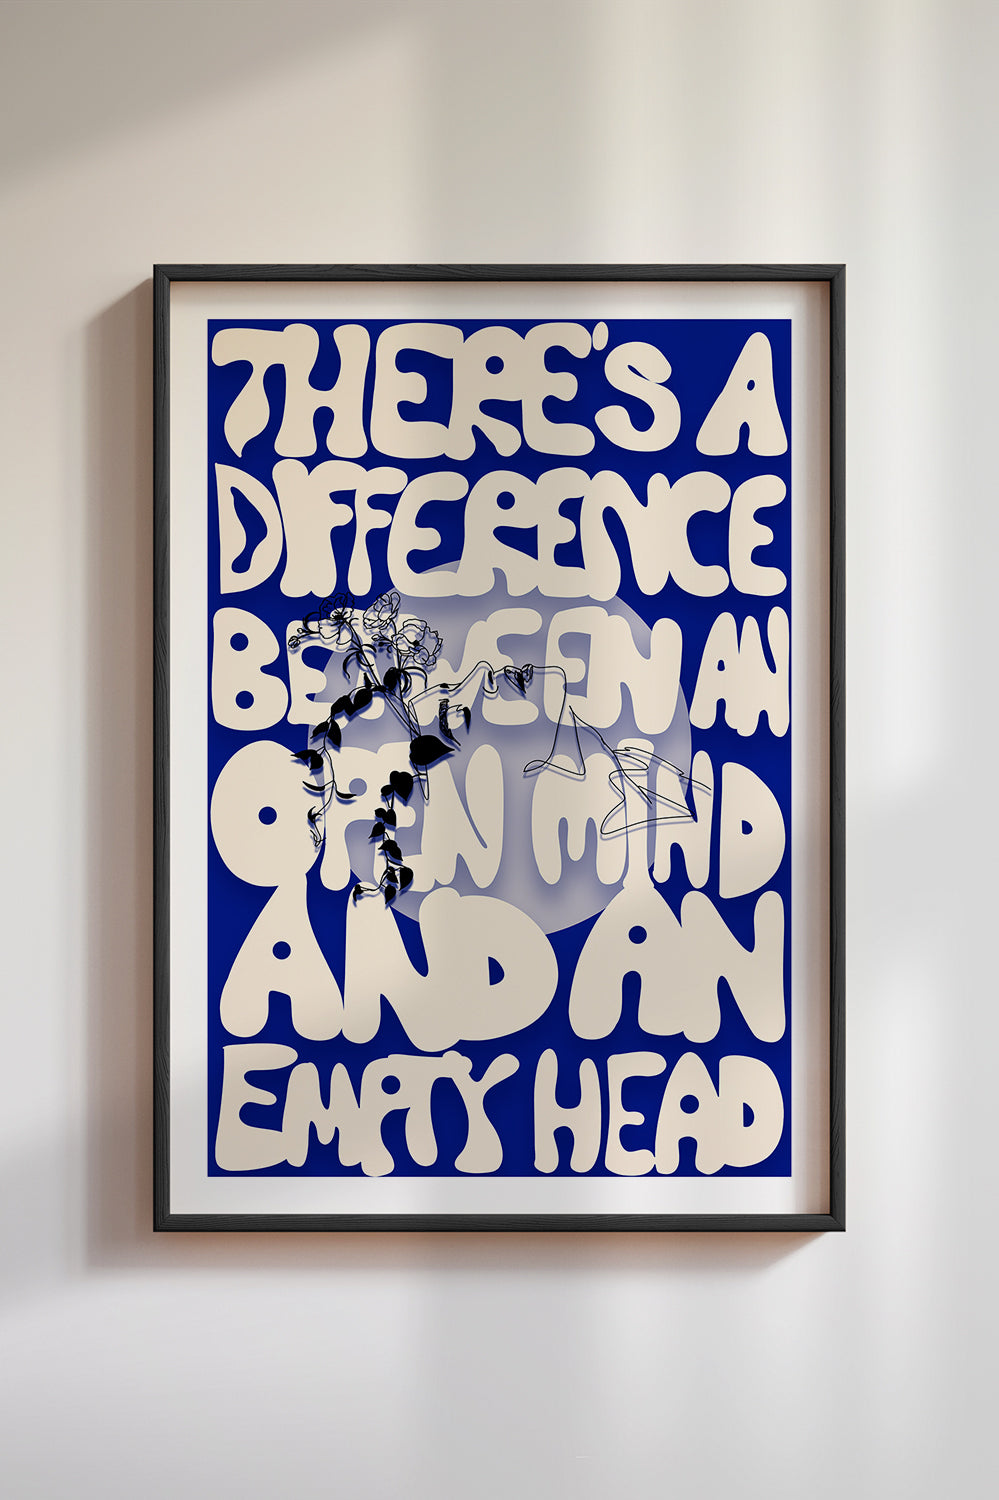 ART PRINT. there's a difference between an open mind and an empty head.